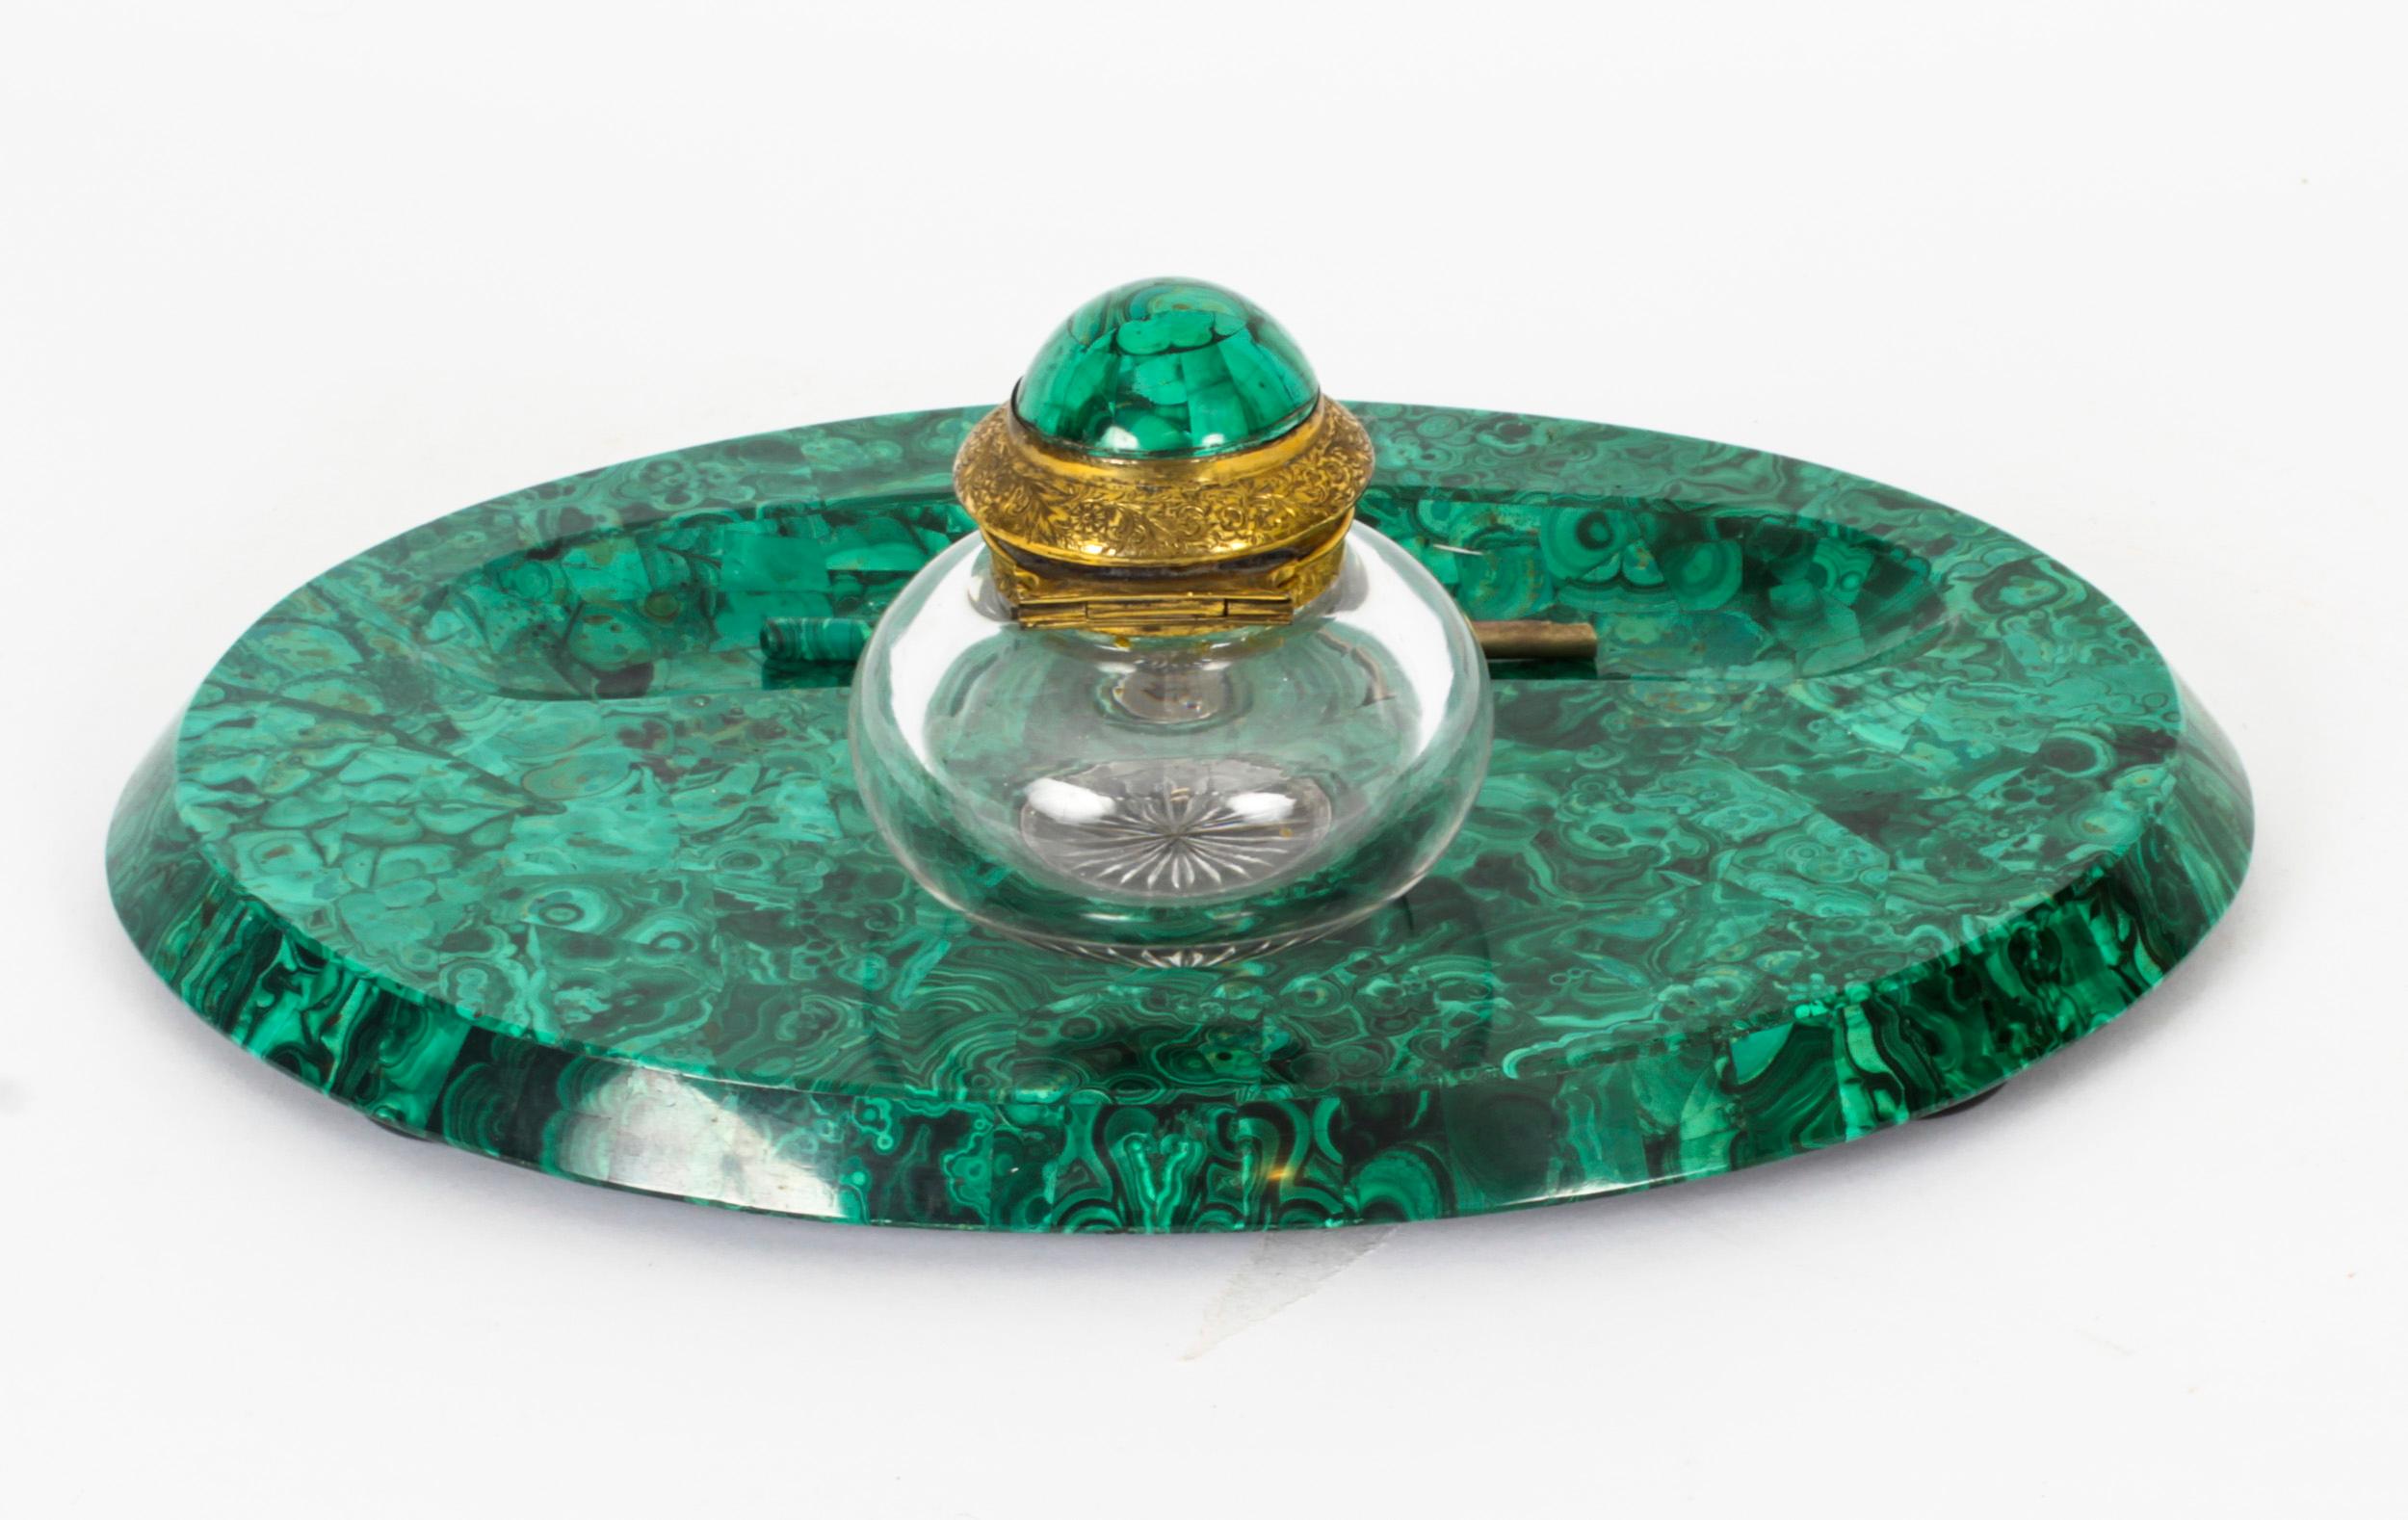 A superb quality Russian malachite mounted desk set, 19th century, comprising an inkwell and Stand and a fountain pen.
 
The bulbous cut glass inkwell with a domed malachite mounted ormolu lid sits on an oval malachite Stand, and the pen sits in